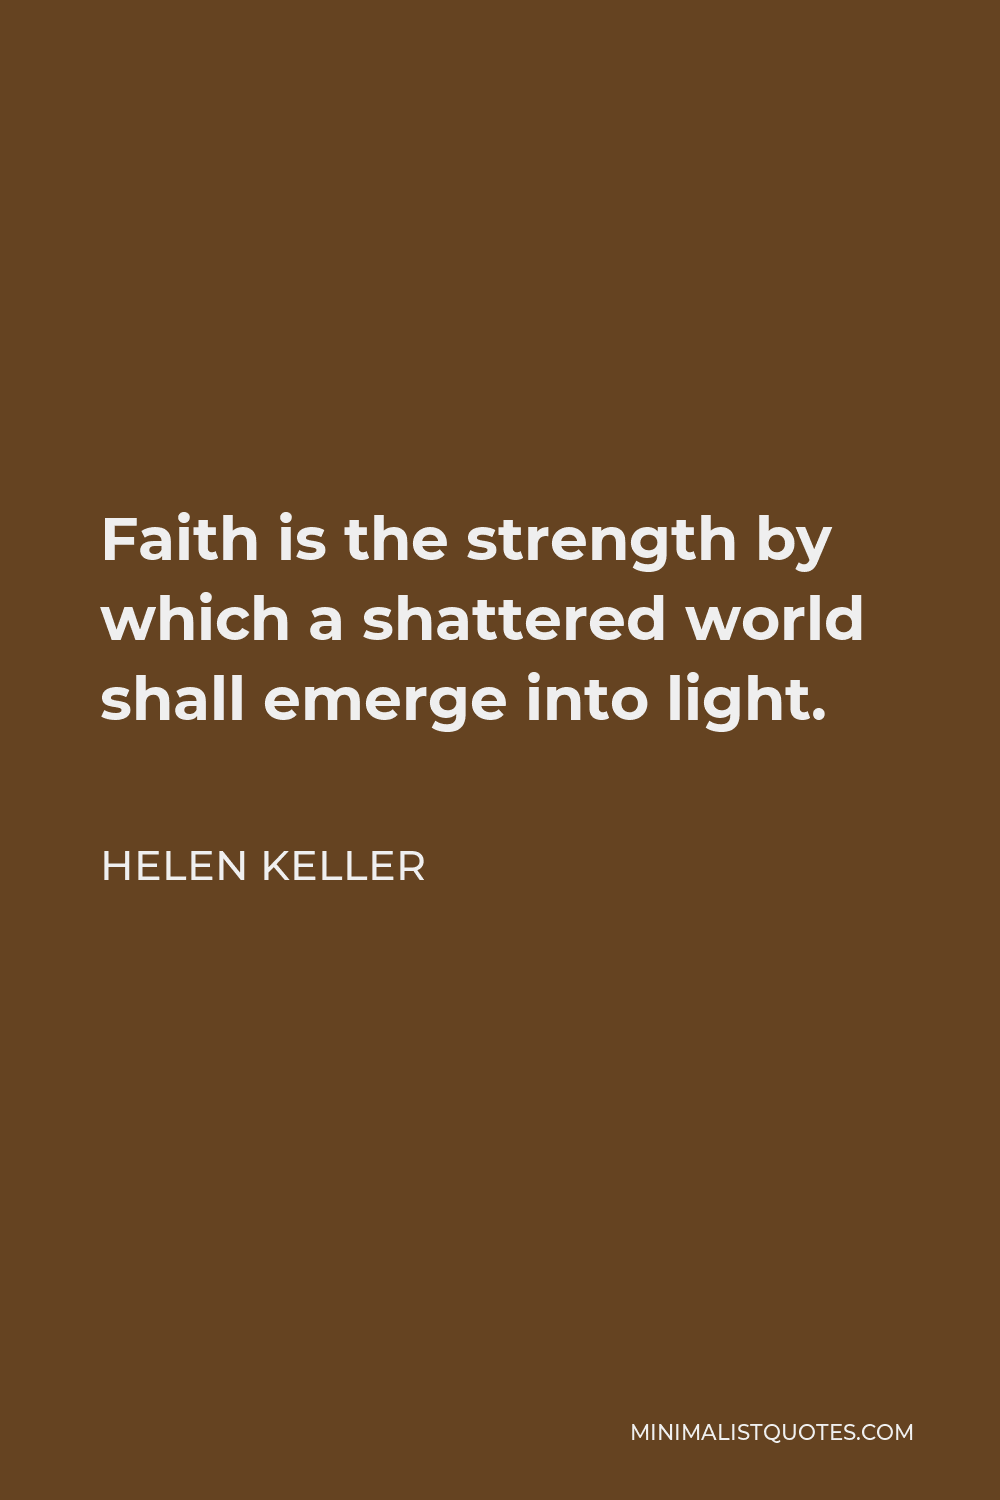 Helen Keller Quote - Faith is the strength by which a shattered world shall emerge into light.